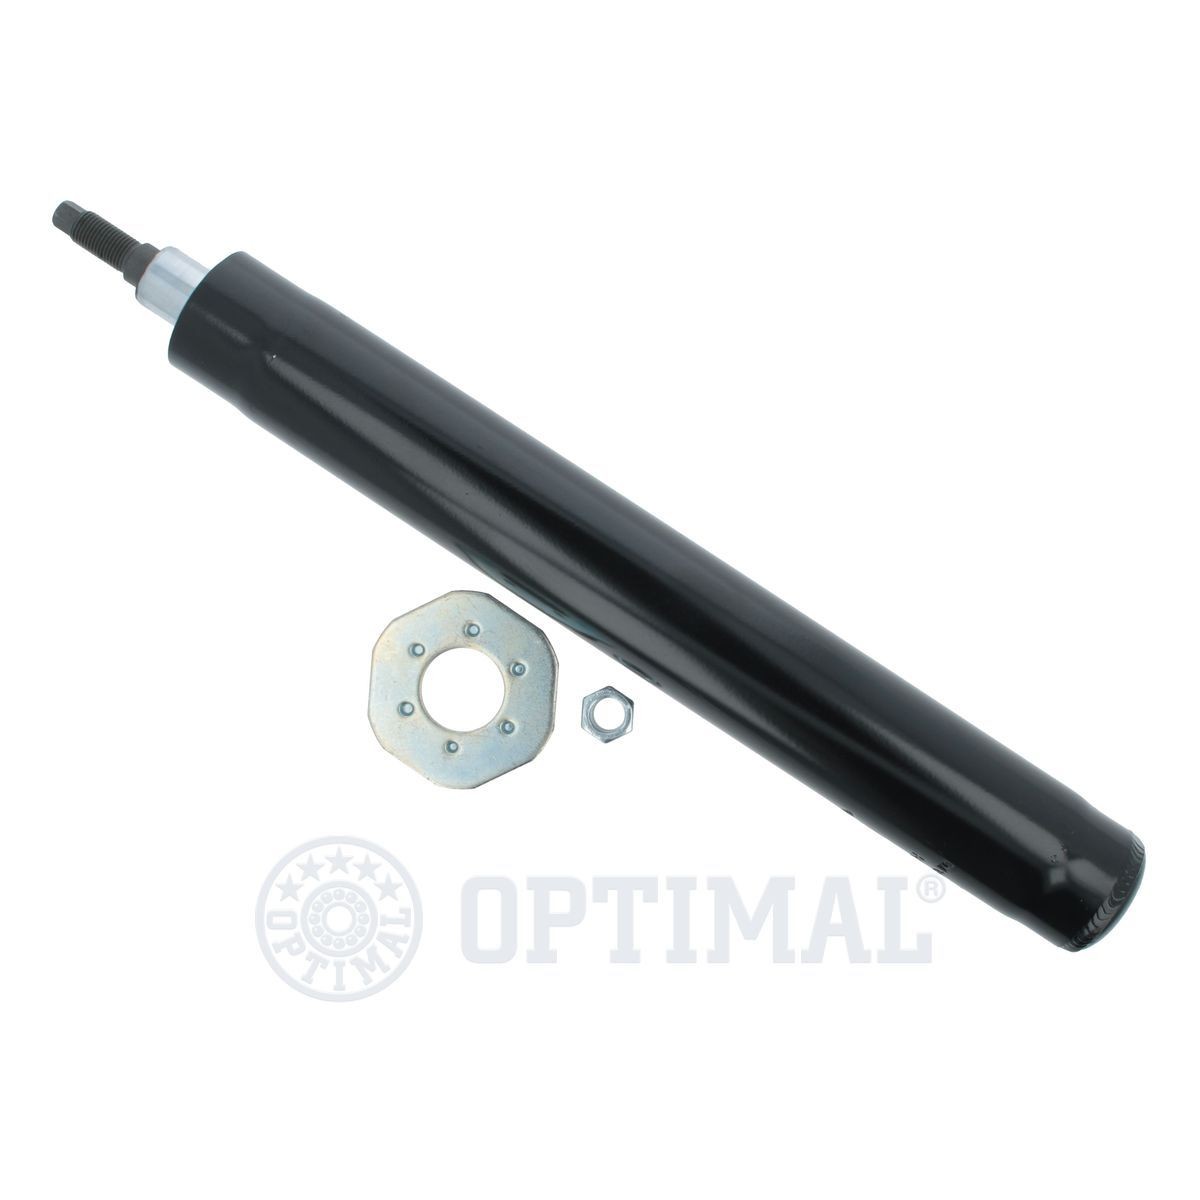 OPTIMAL A-8102H Shock absorber Front Axle, Oil Pressure, Twin-Tube, Suspension Strut Insert, Top pin, Bottom Clamp